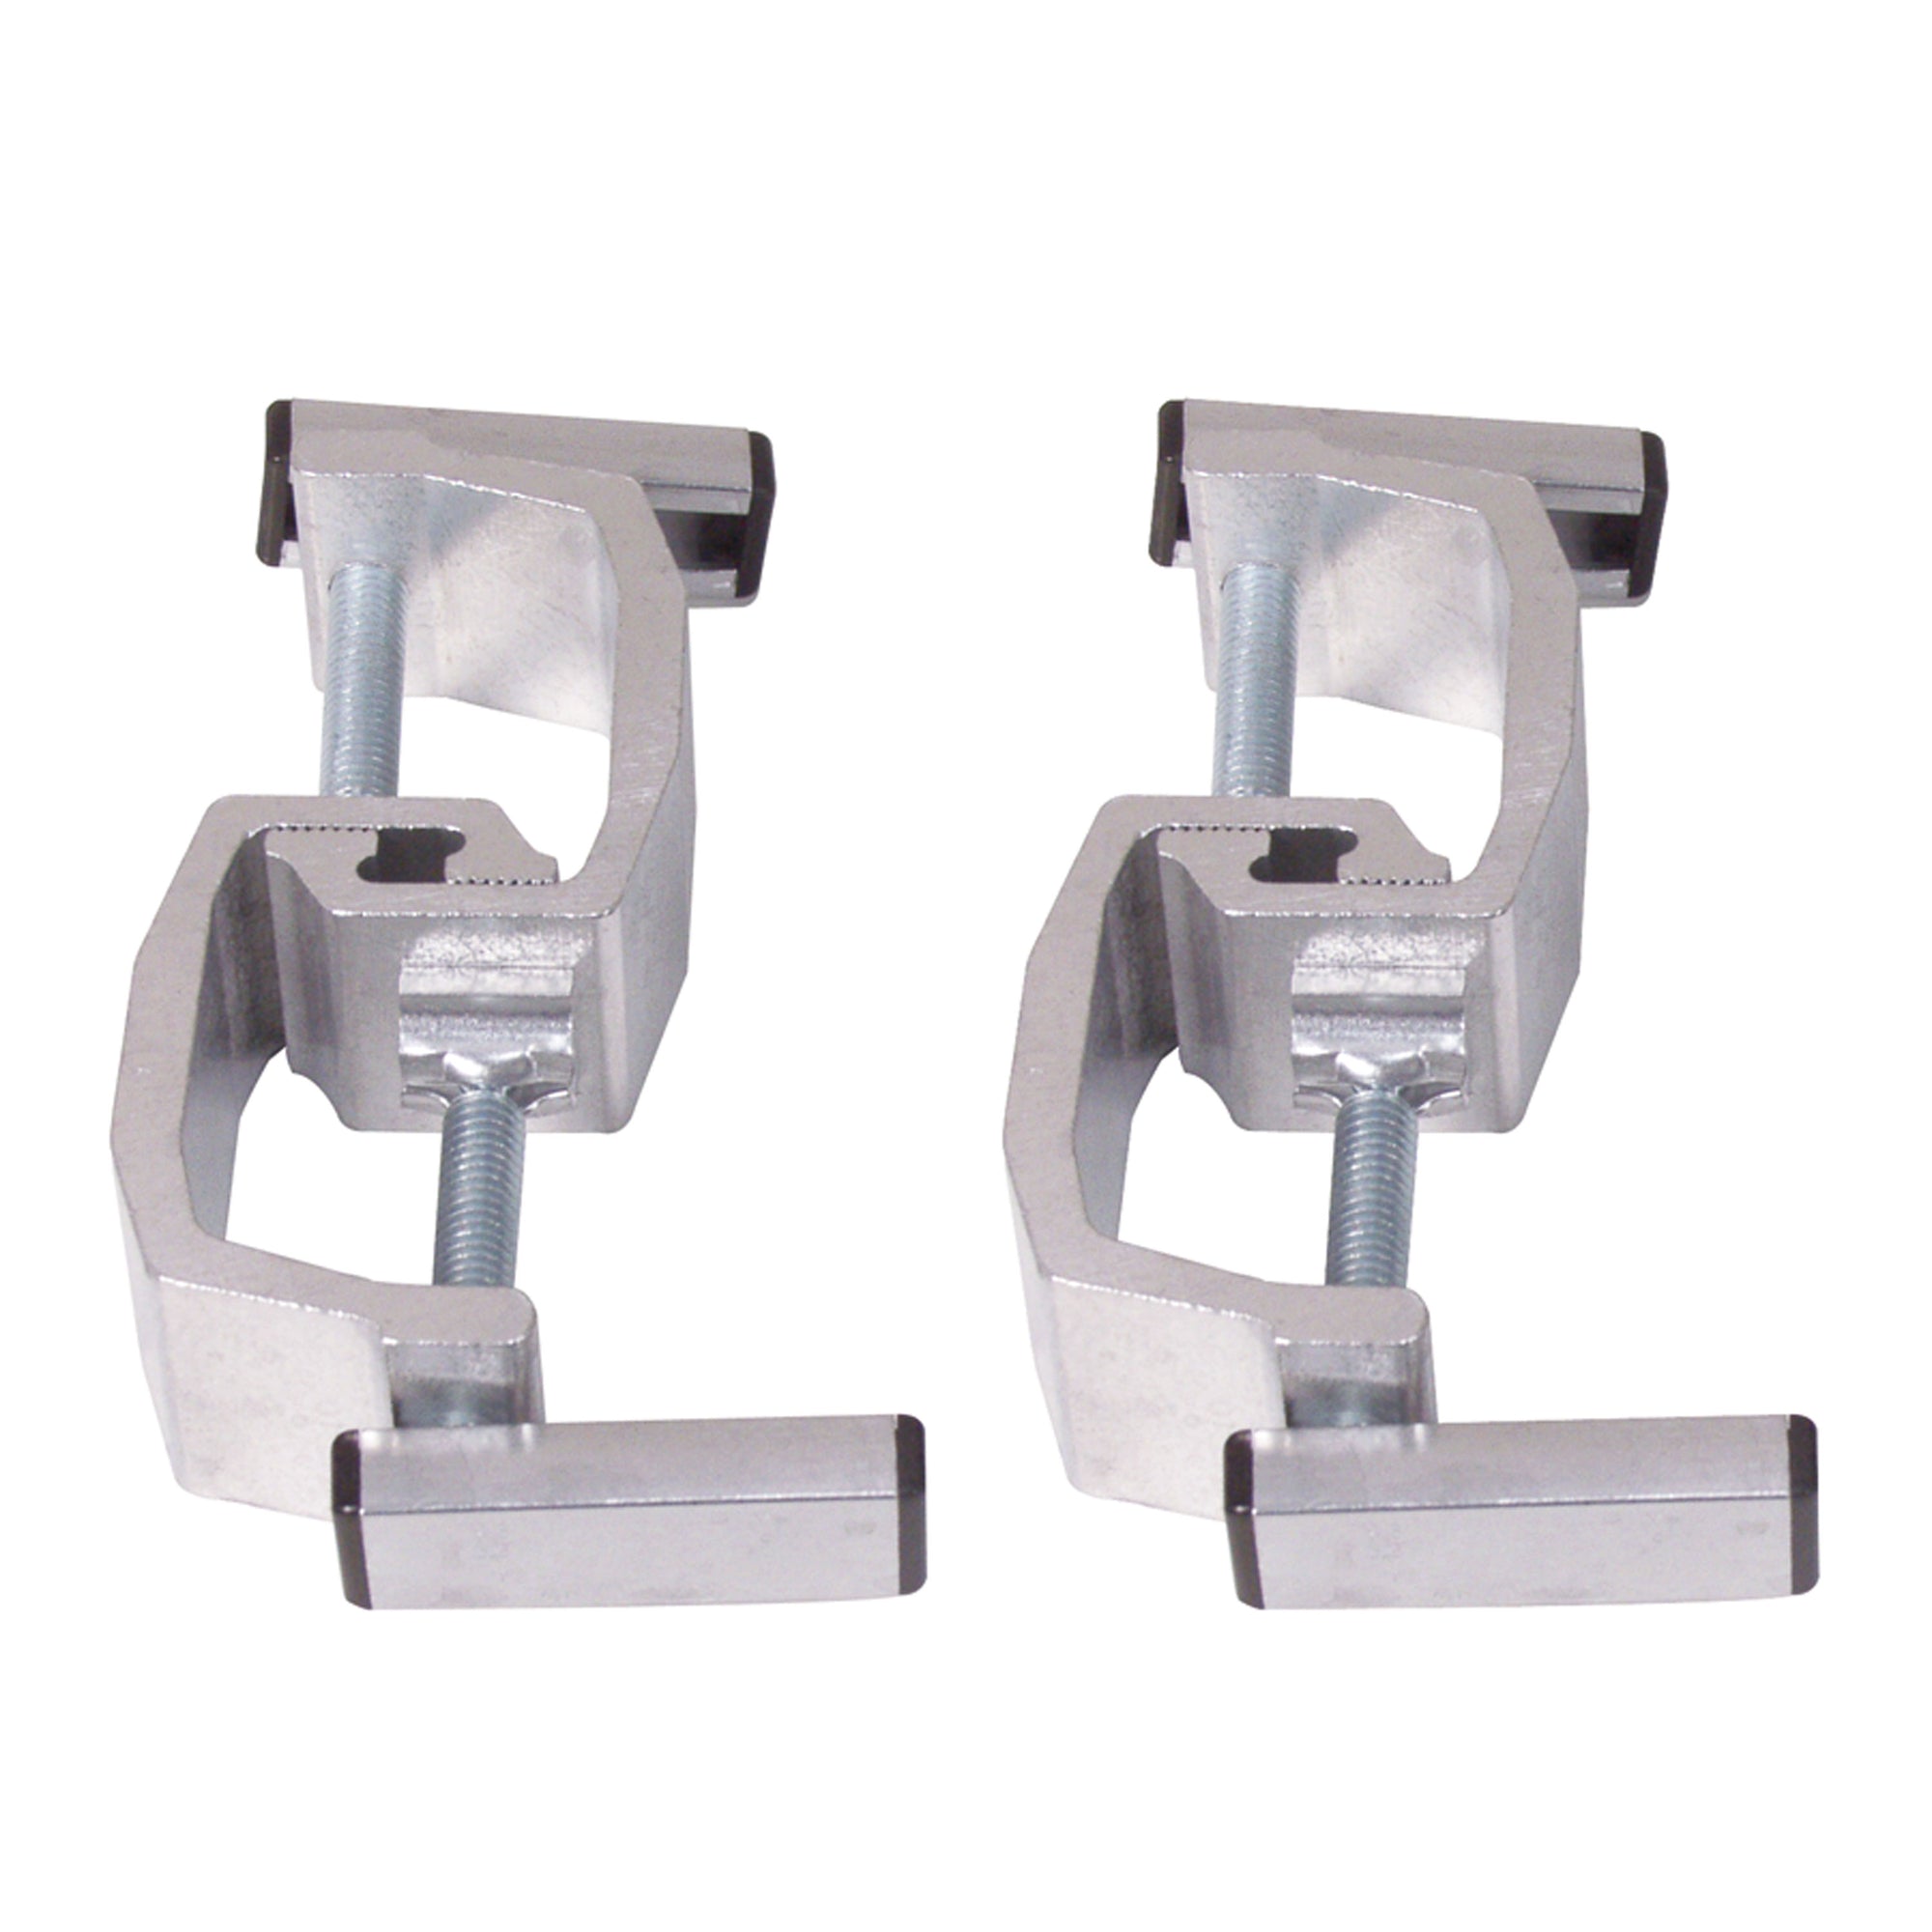 Tite-Lok 3118/4 Clamps - 4 Pack